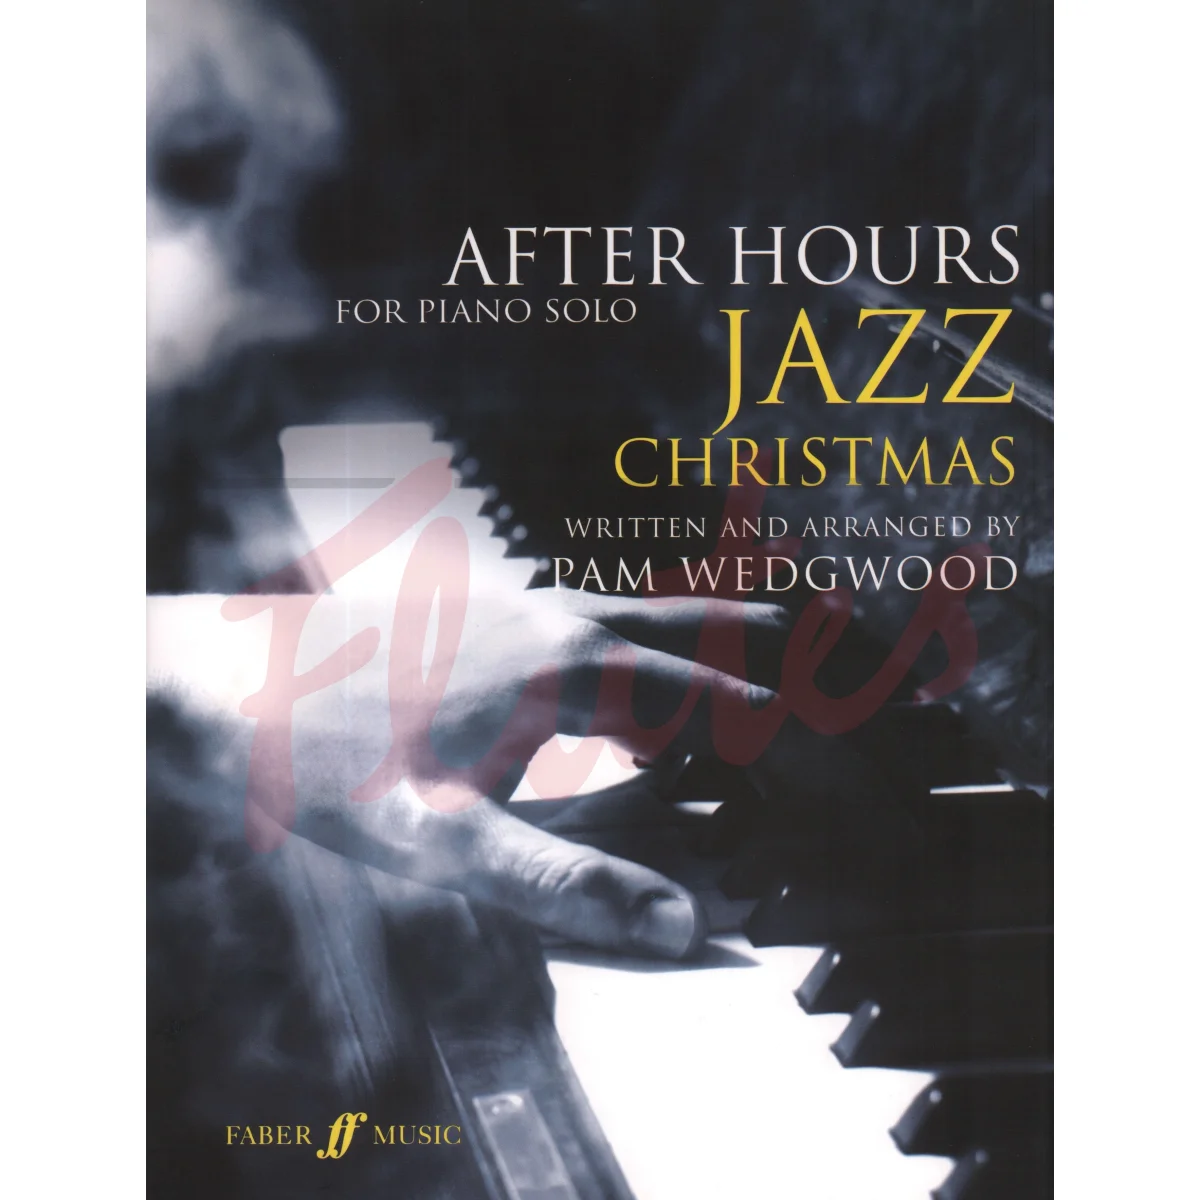 After Hours for Piano Solo - Jazz Christmas